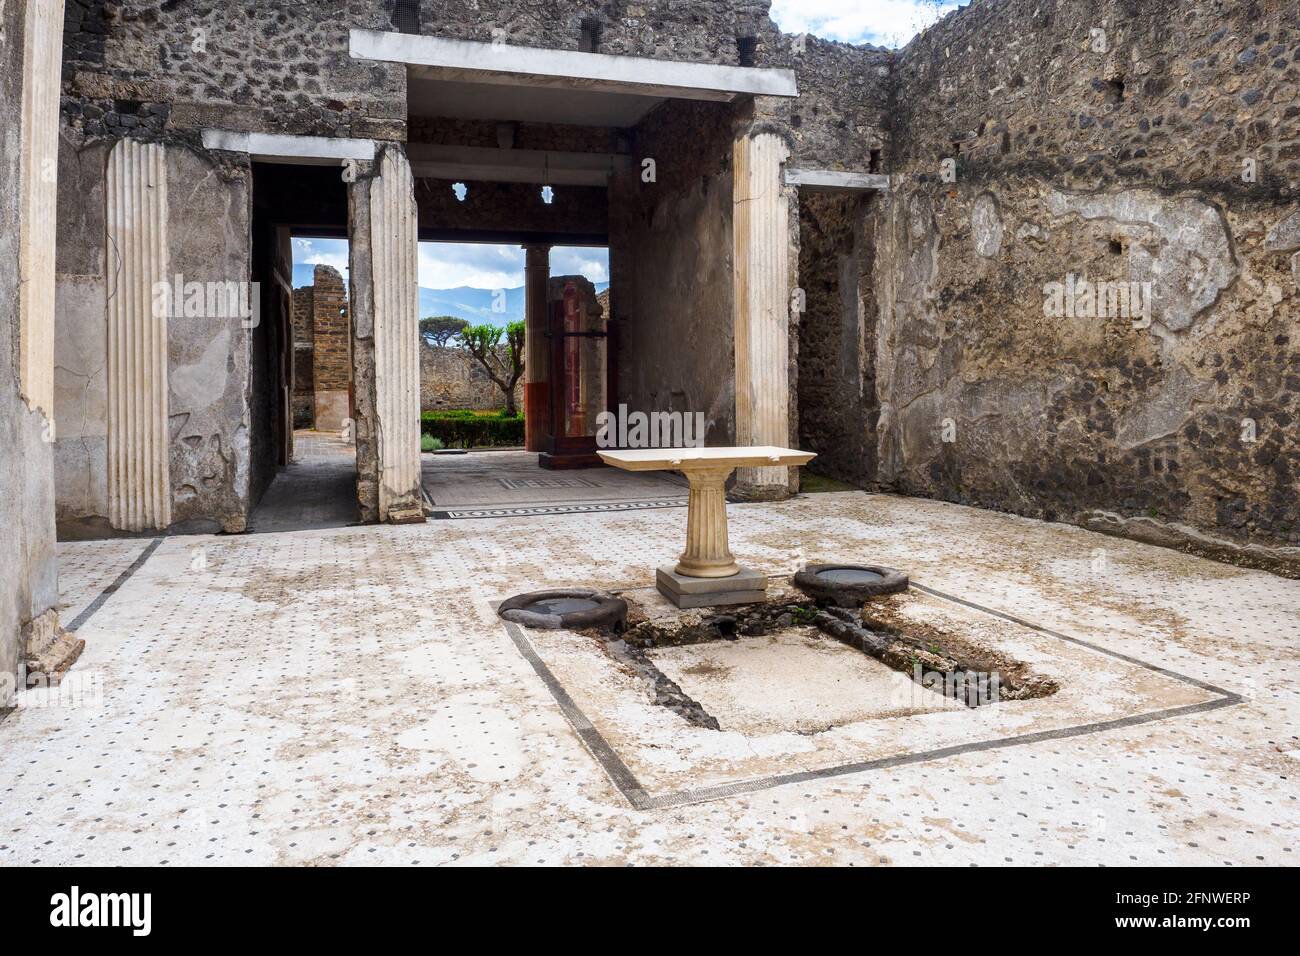 Square atrium which has a central impluvium (water tank). The floor of the atrium consists of crushed lava decorated with small chips of white marble. Casa del frutteto (House of the Orchard) - Pompeii archaeological site, Italy Stock Photo